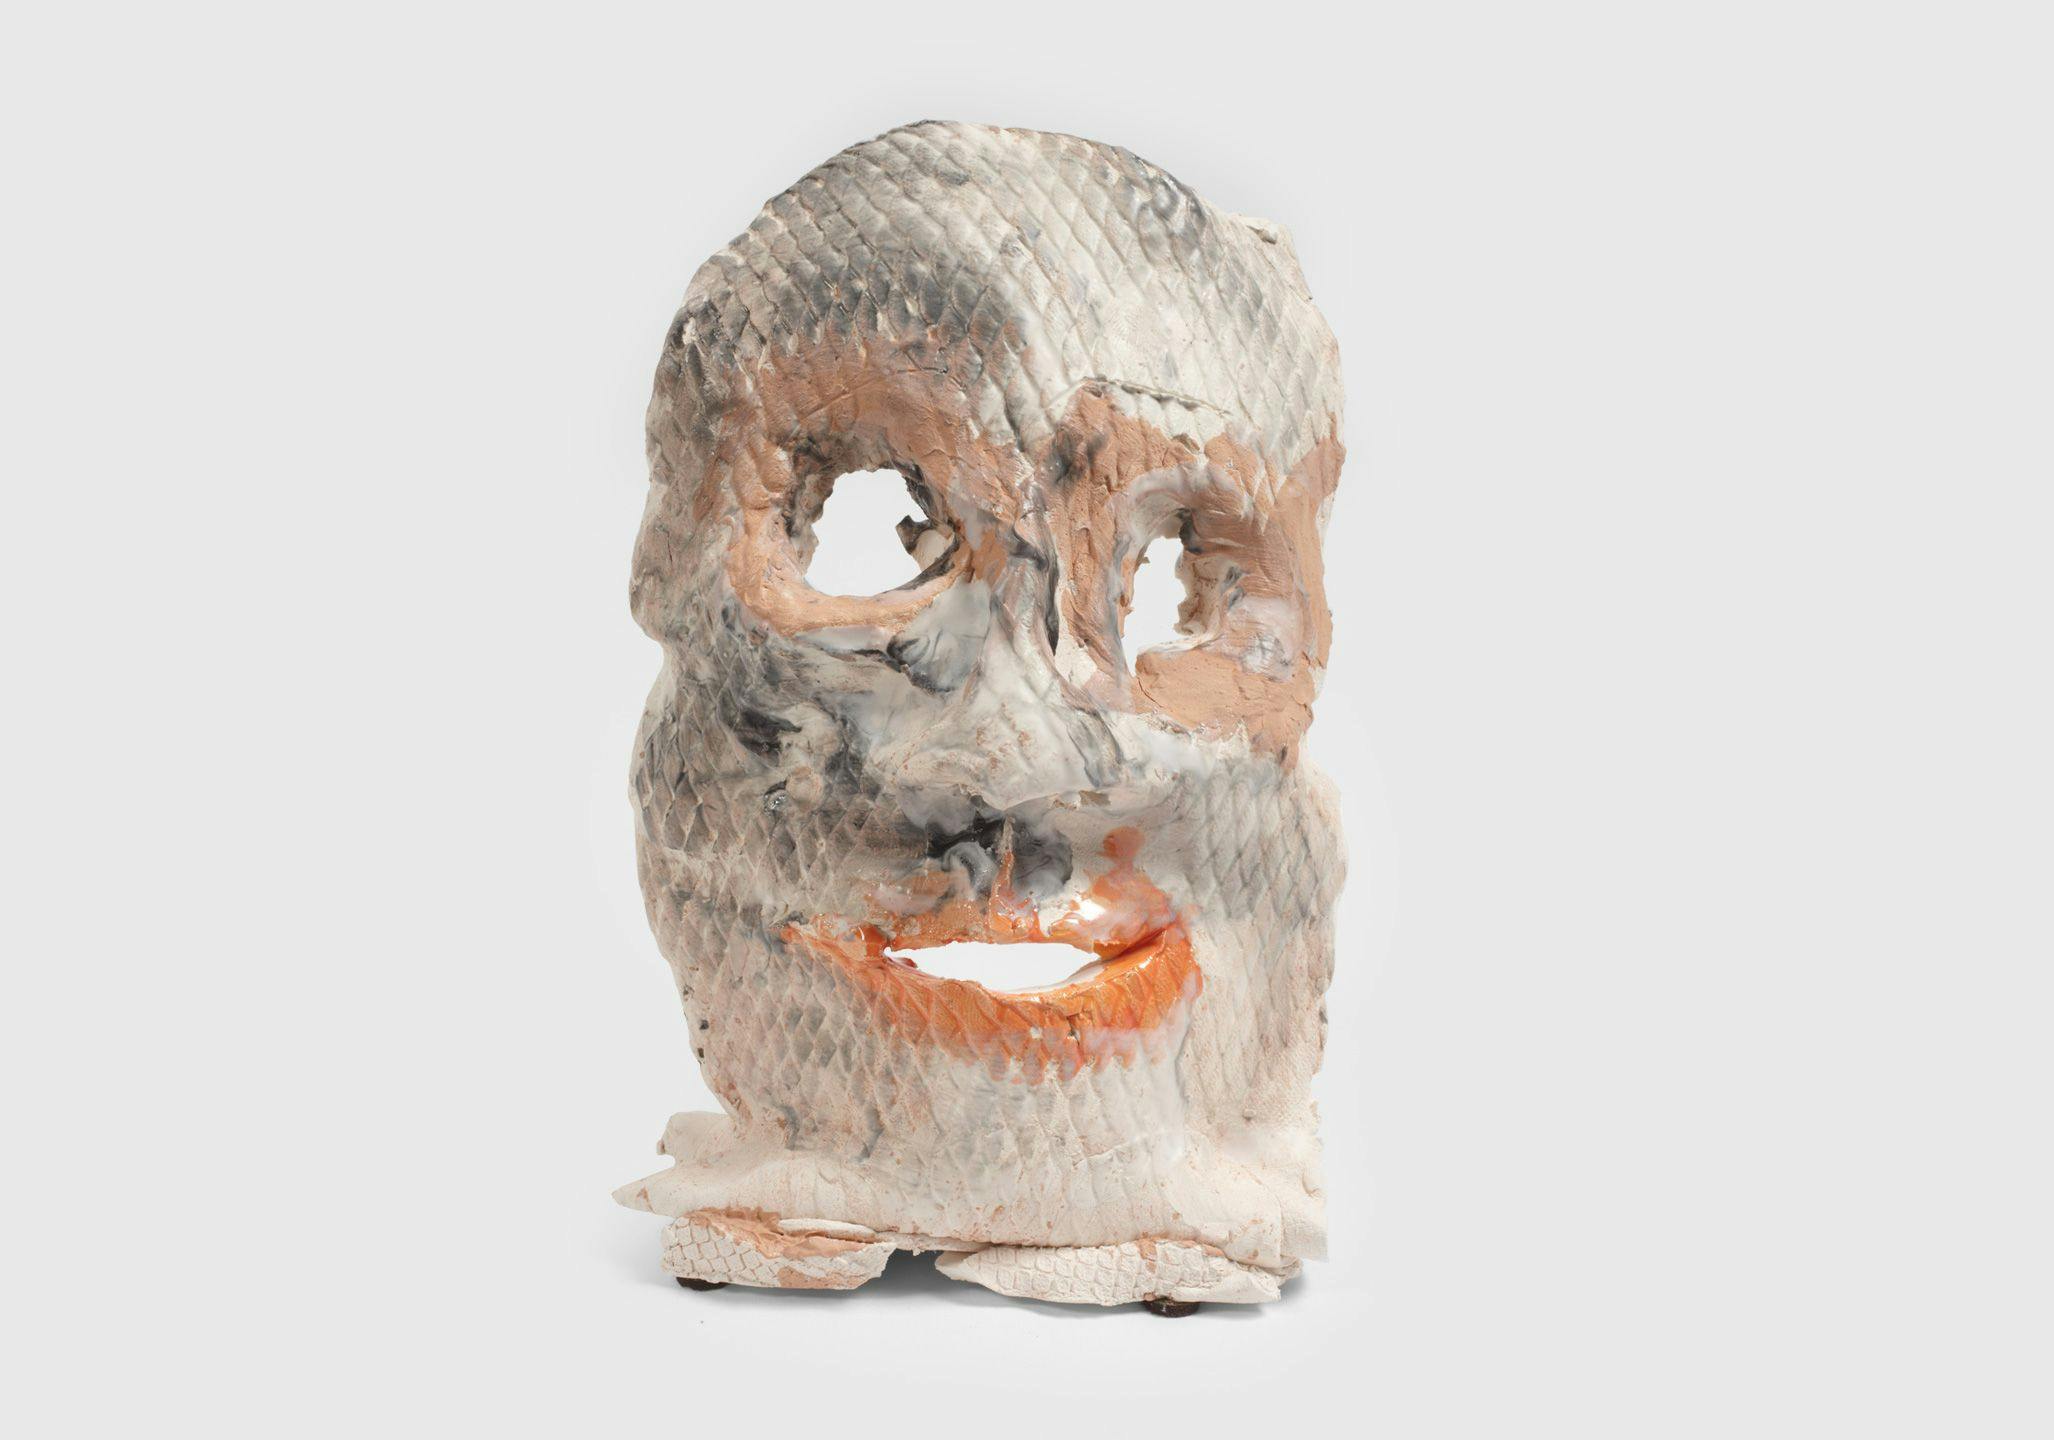 An untitled ceramic sculpture by Josh Smith dated 2012.